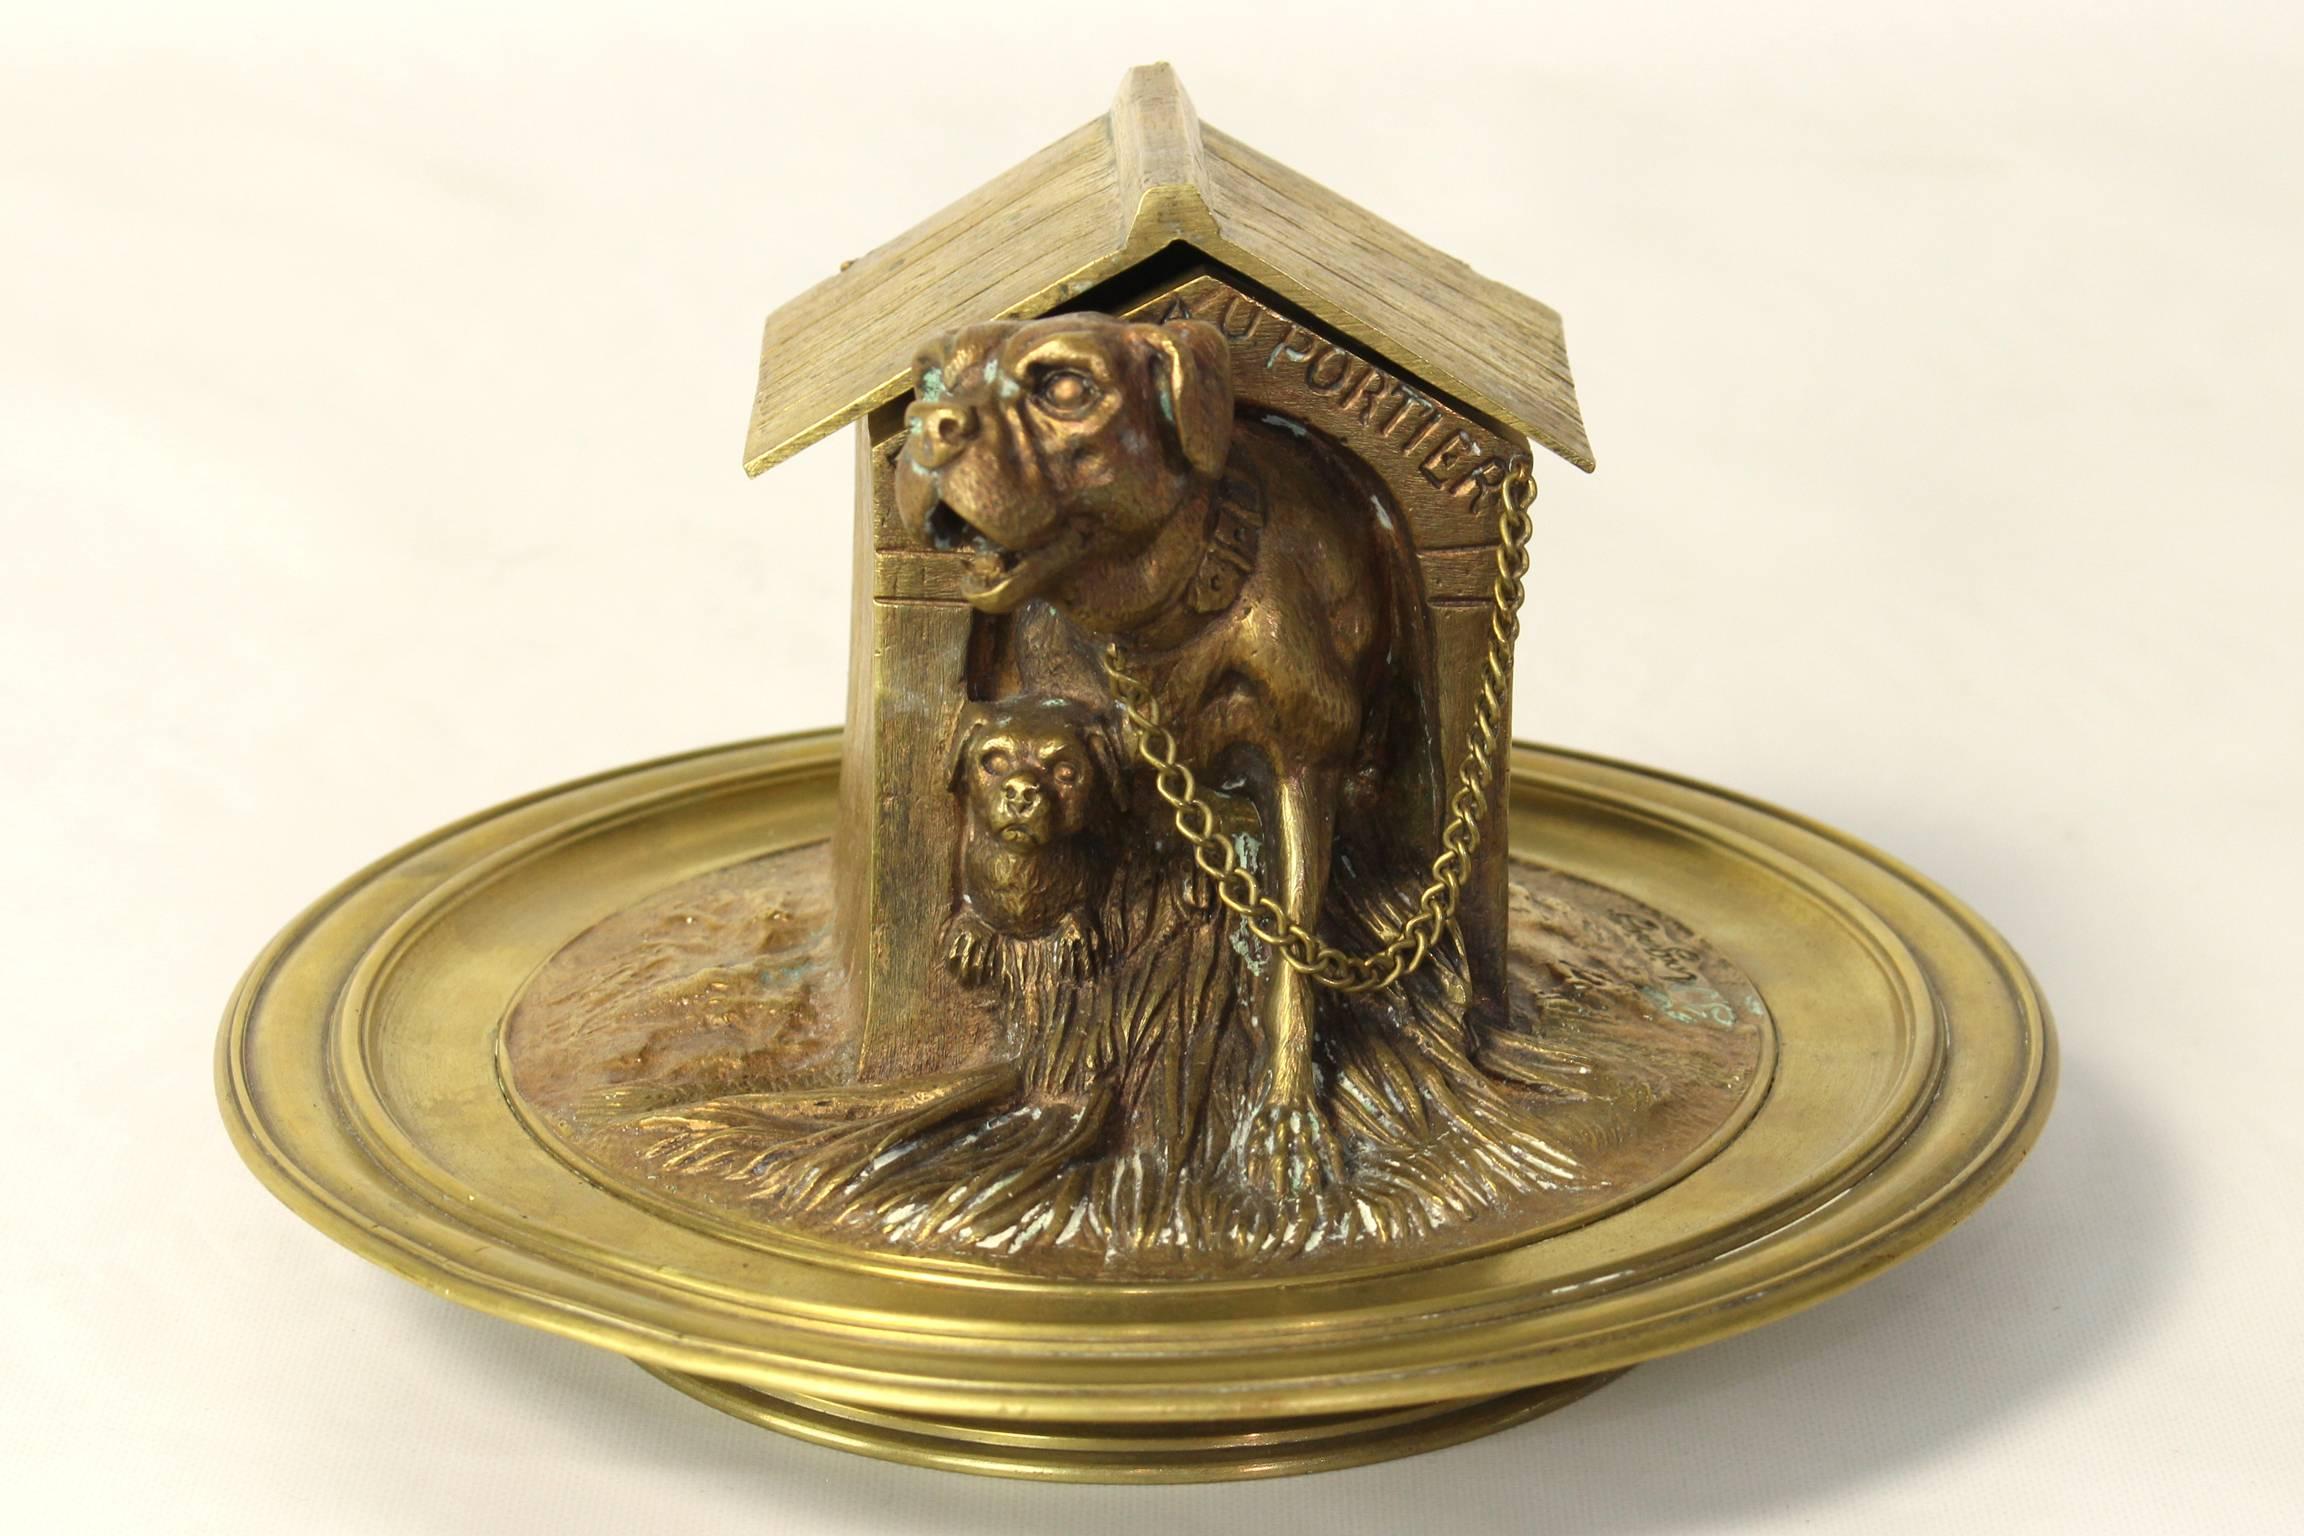 A very charming late 19th century French gilt bronze inkwell in the form of a mother dog and her pup in a rustic wooden house. The roof of the dog house conceals the ceramic inkwell. Signed bottom right.